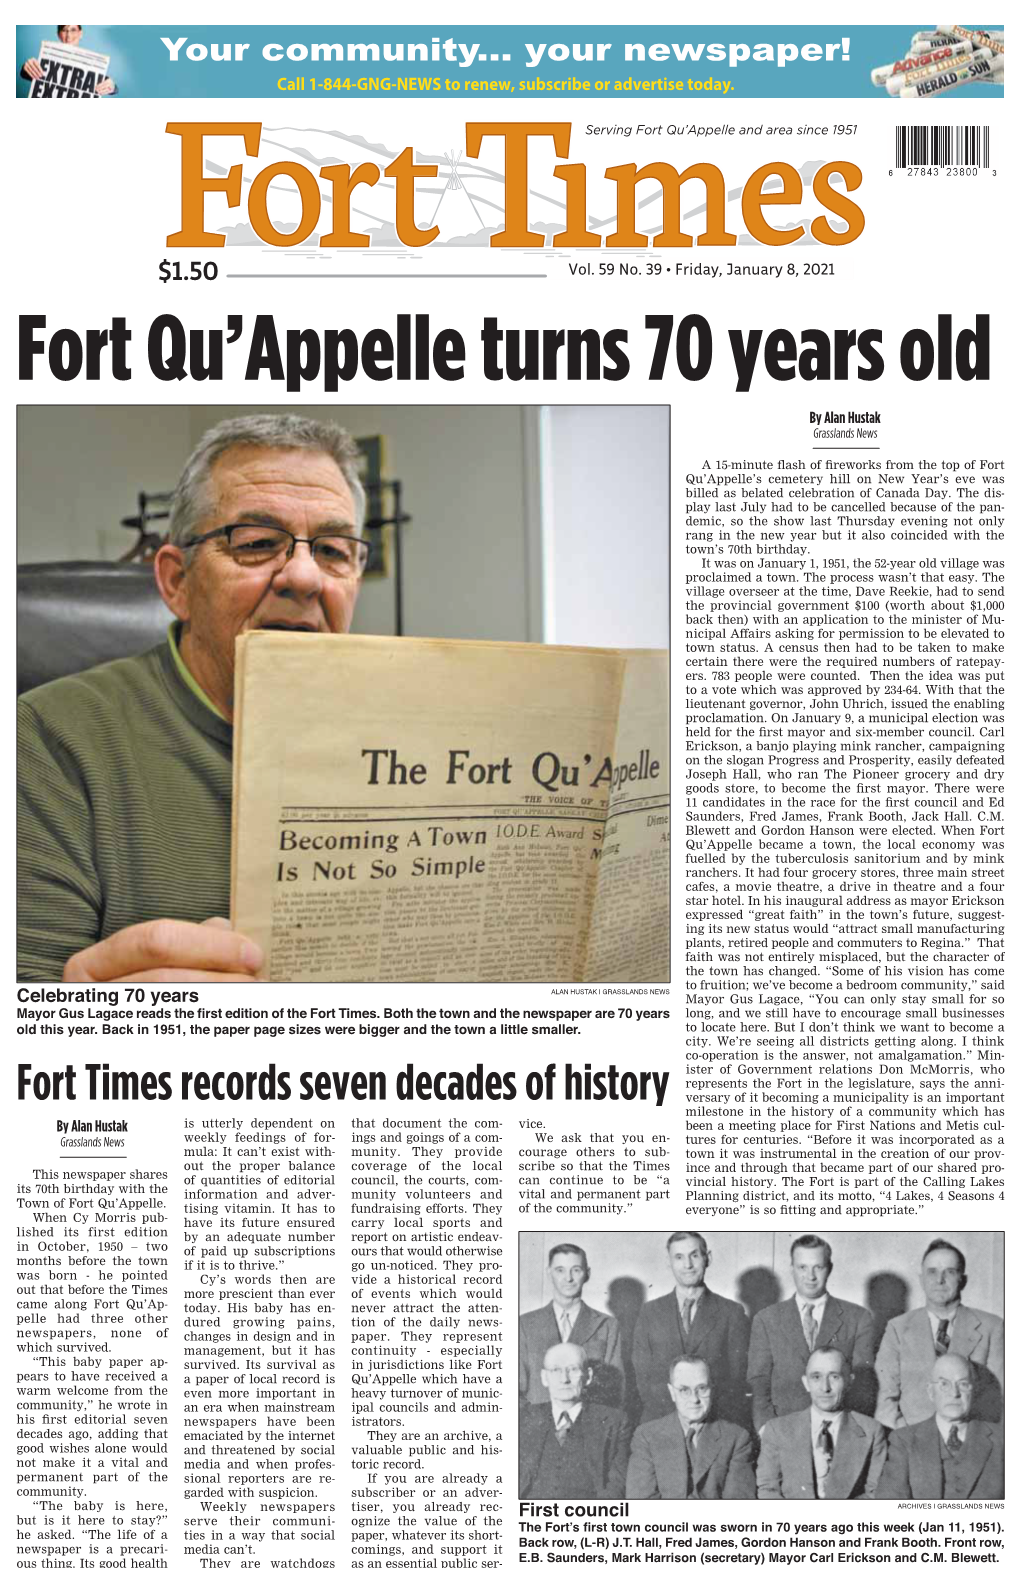 Fort Qu'appelle Turns 70 Years